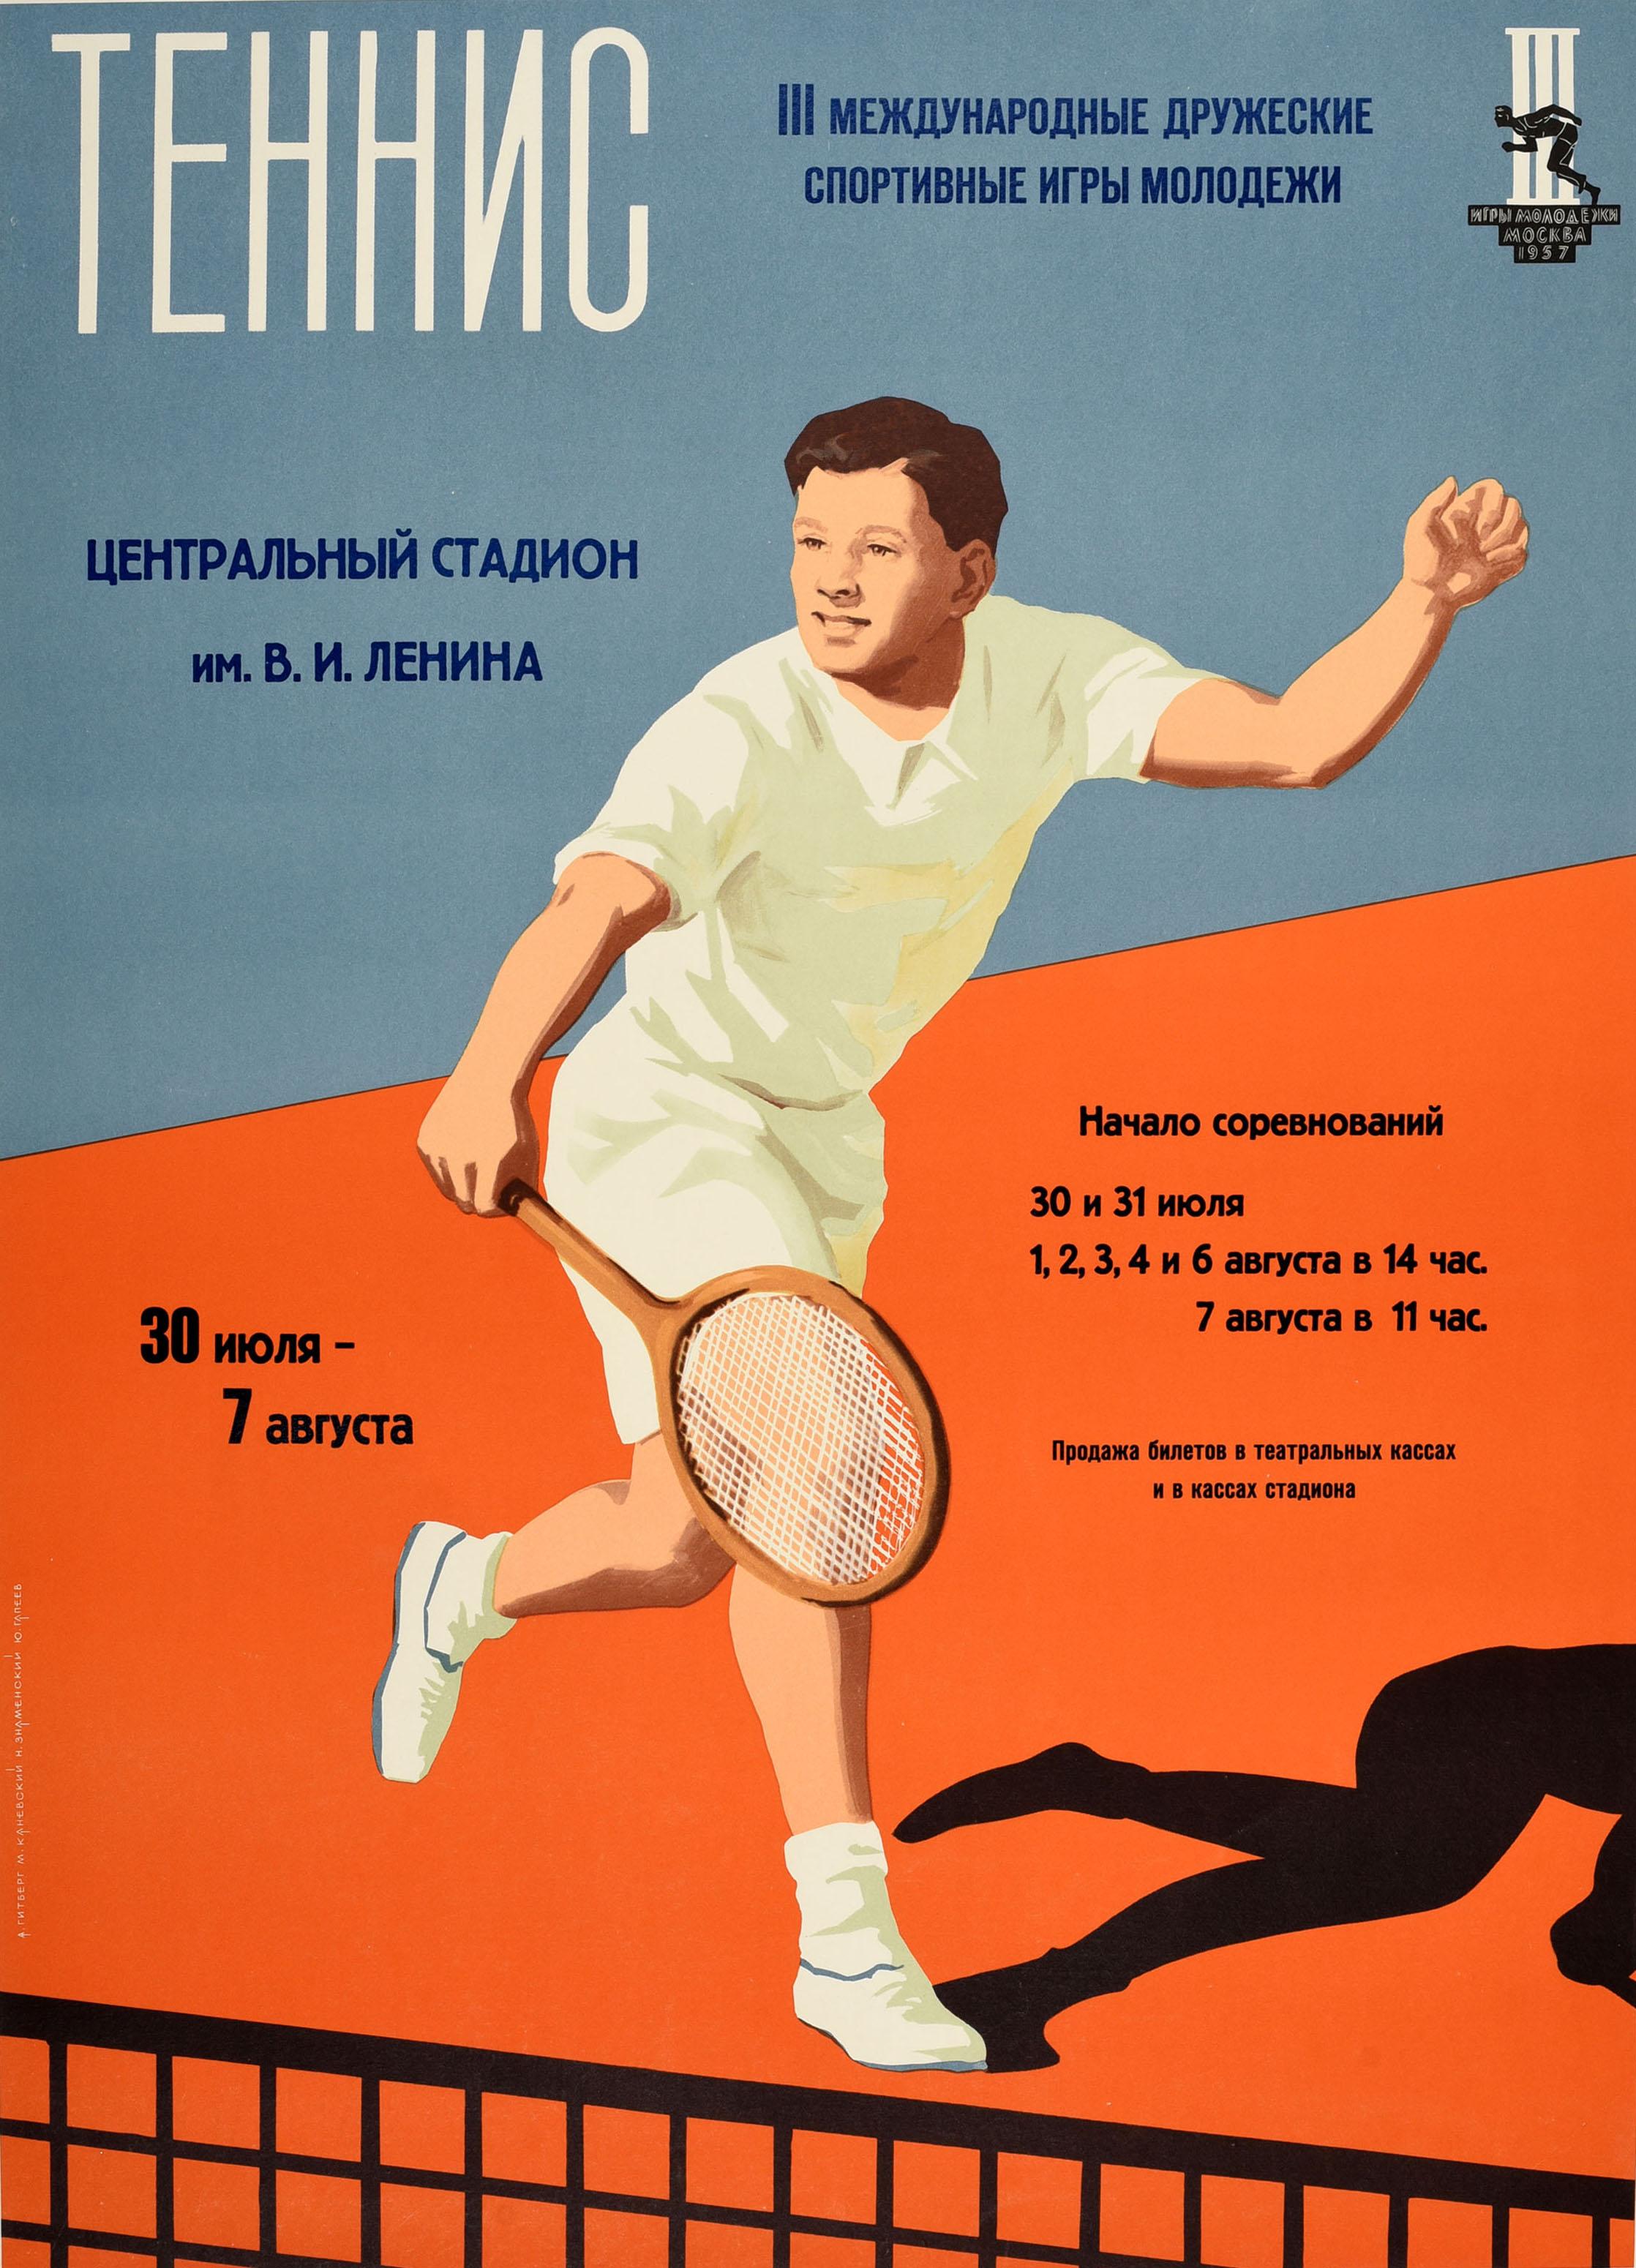 Original vintage Soviet sport poster for Tennis at the 3rd international friendly youth sports games which took place at Central stadium named after Vladimir Lenin from July 30 - August 7. Design features a young man wearing tennis whites and